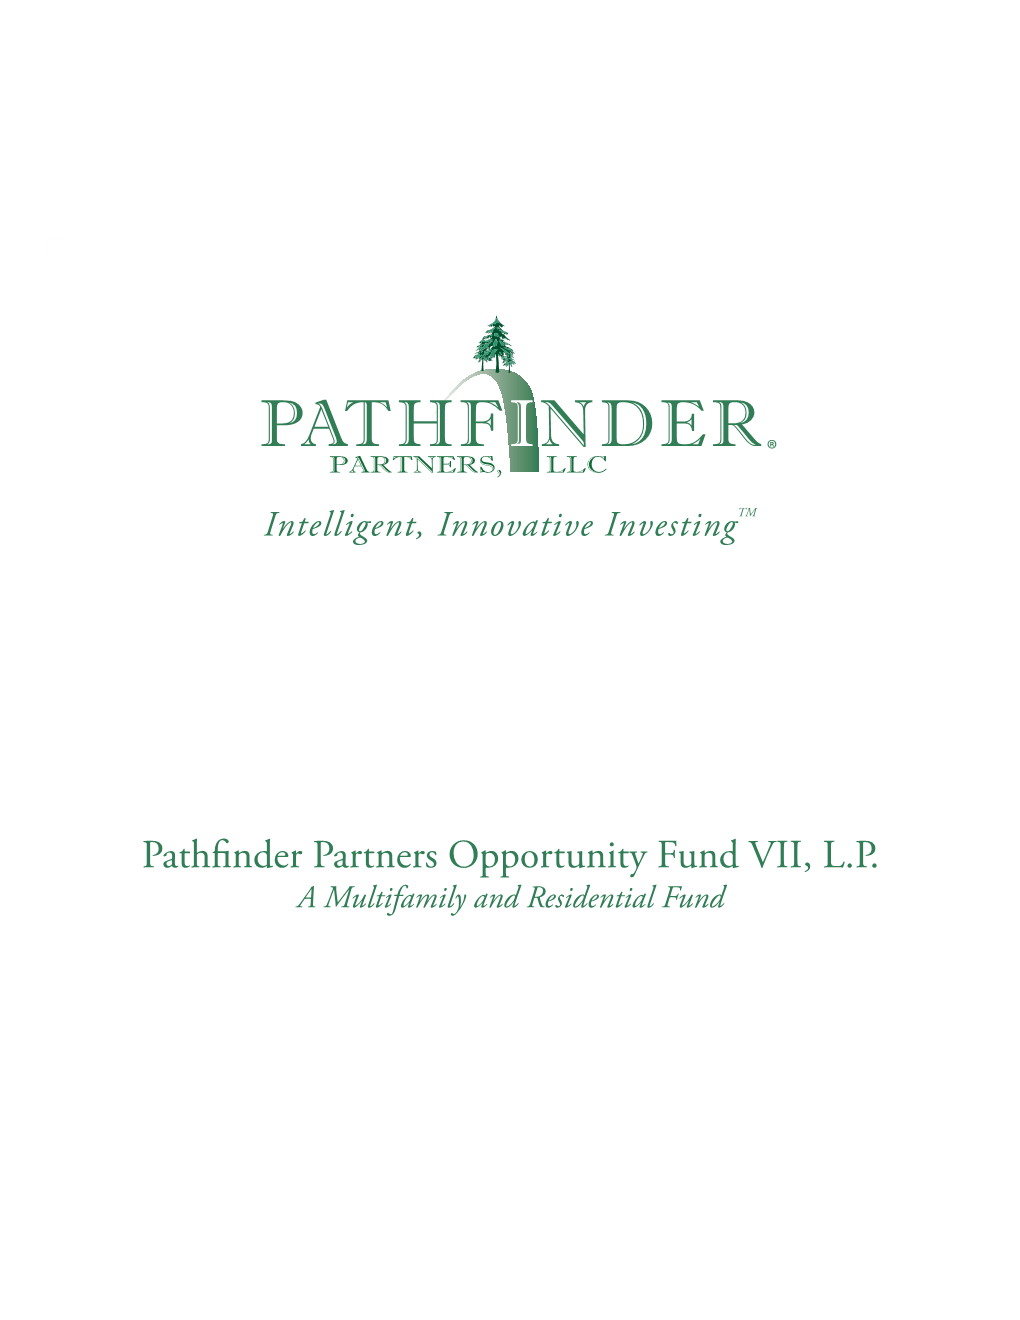 Pathfinder Partners Opportunity Fund VII, L.P. a Multifamily and Residential Fund